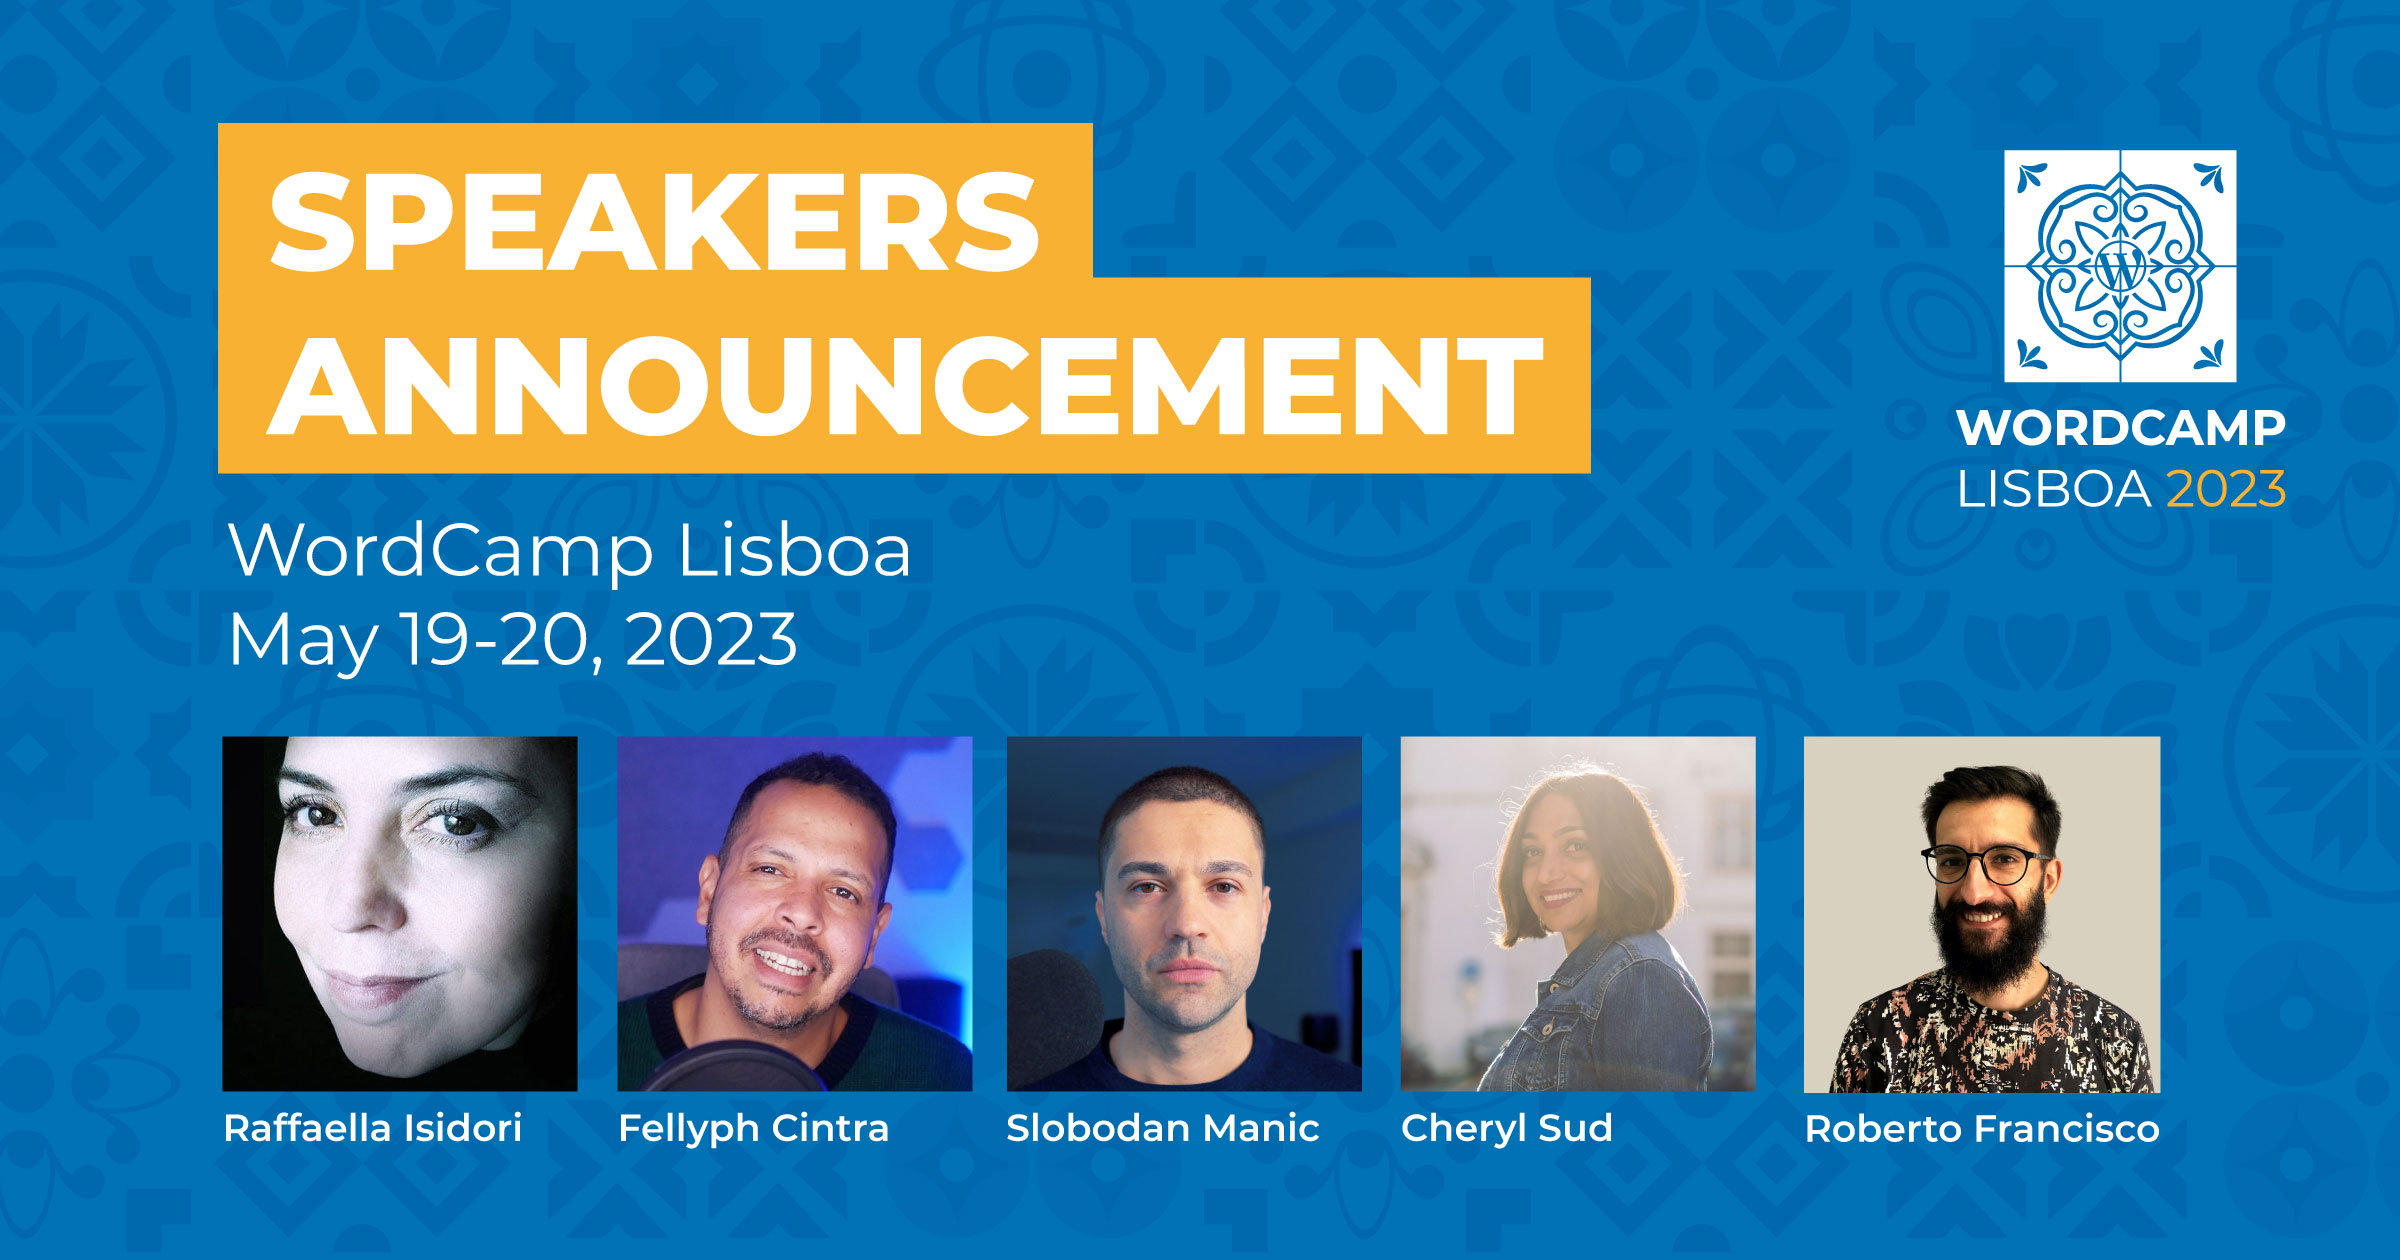 Picture of 5 speakers for WordCamp Lisboa 2023